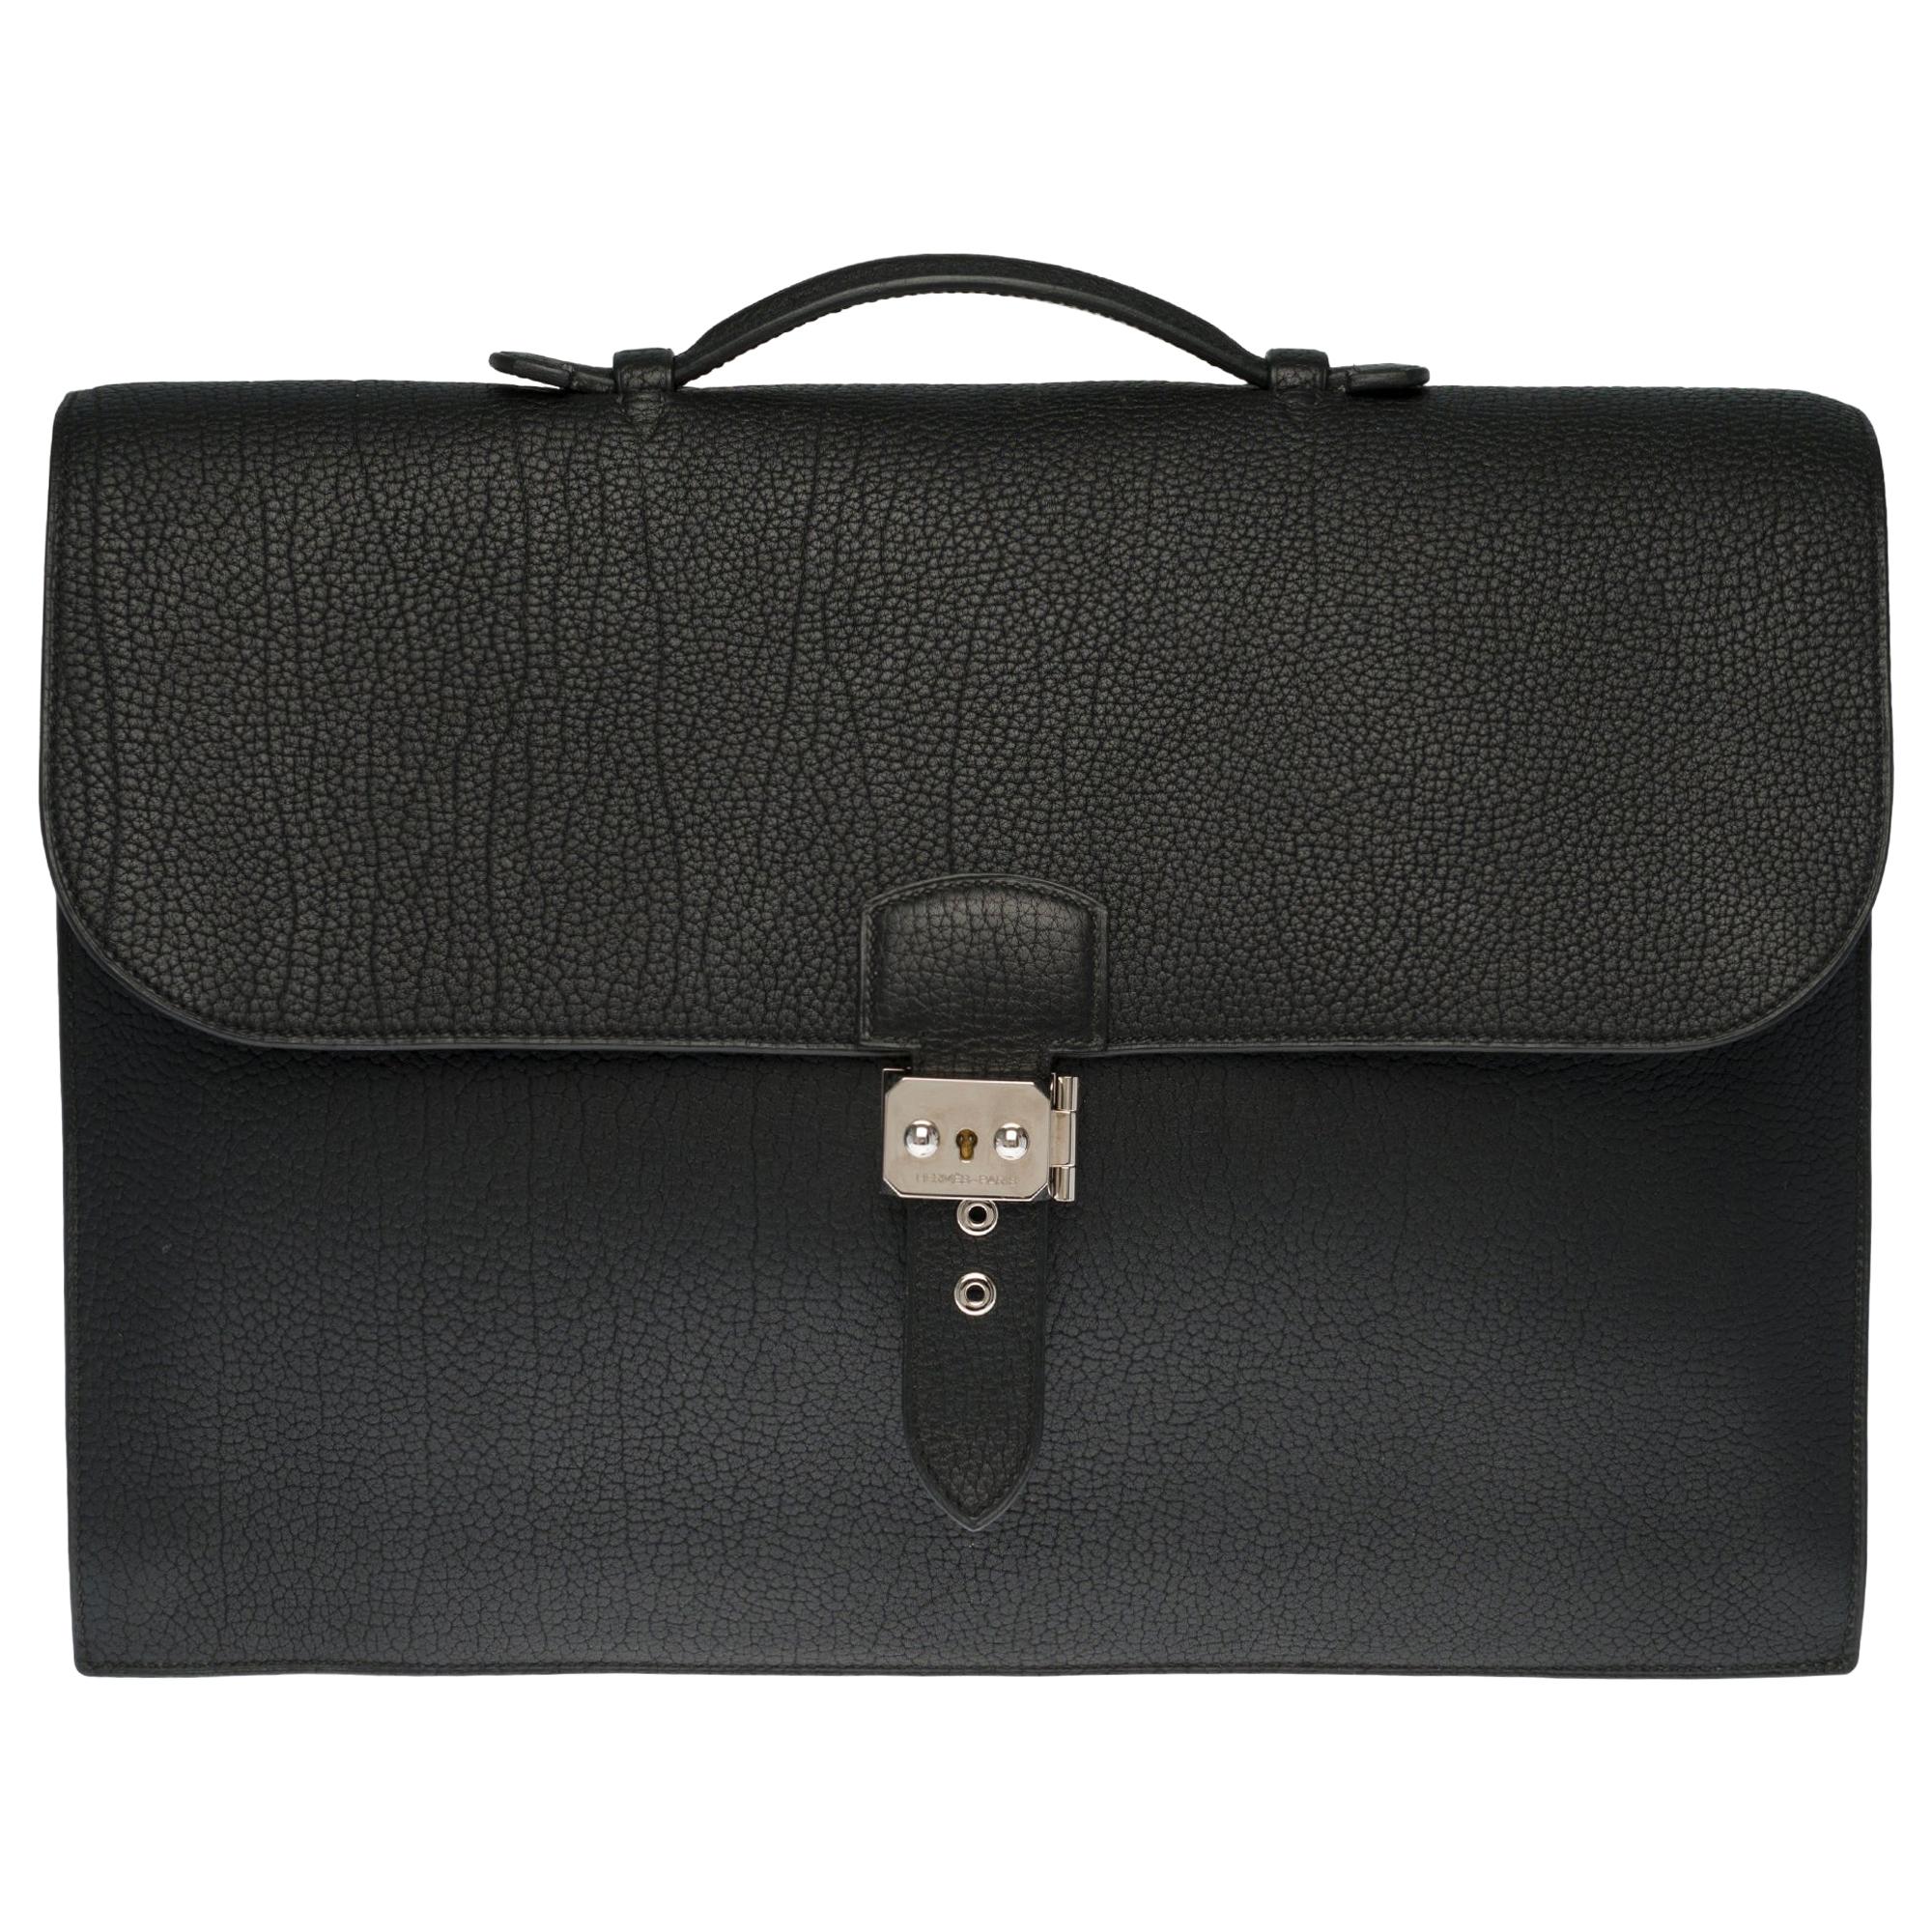 Hermès Sac à dépêches briefcase in black Fjord leather with silver hardware